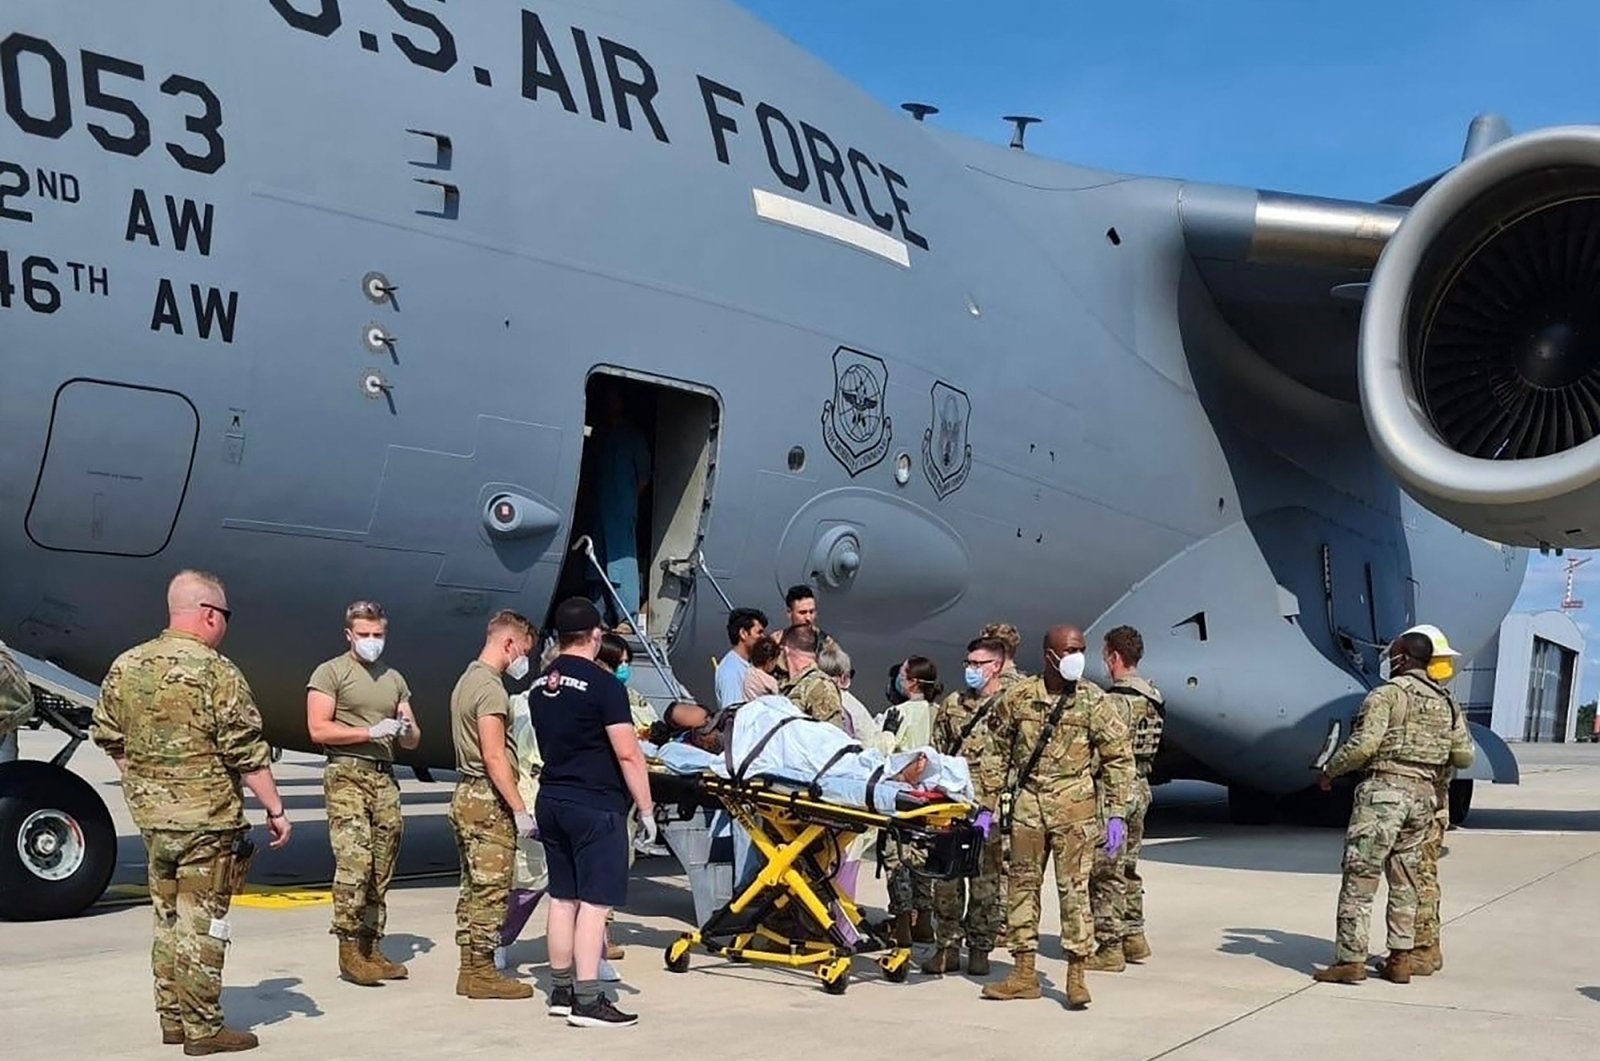 Medical support personnel from the 86th Medical Group help an Afghan mother and family off a U.S. Air Force C-17 moments after she delivered a baby aboard the aircraft after landing at Ramstein Air Base, Germany, Aug. 21, 2021. (AFP Photo)